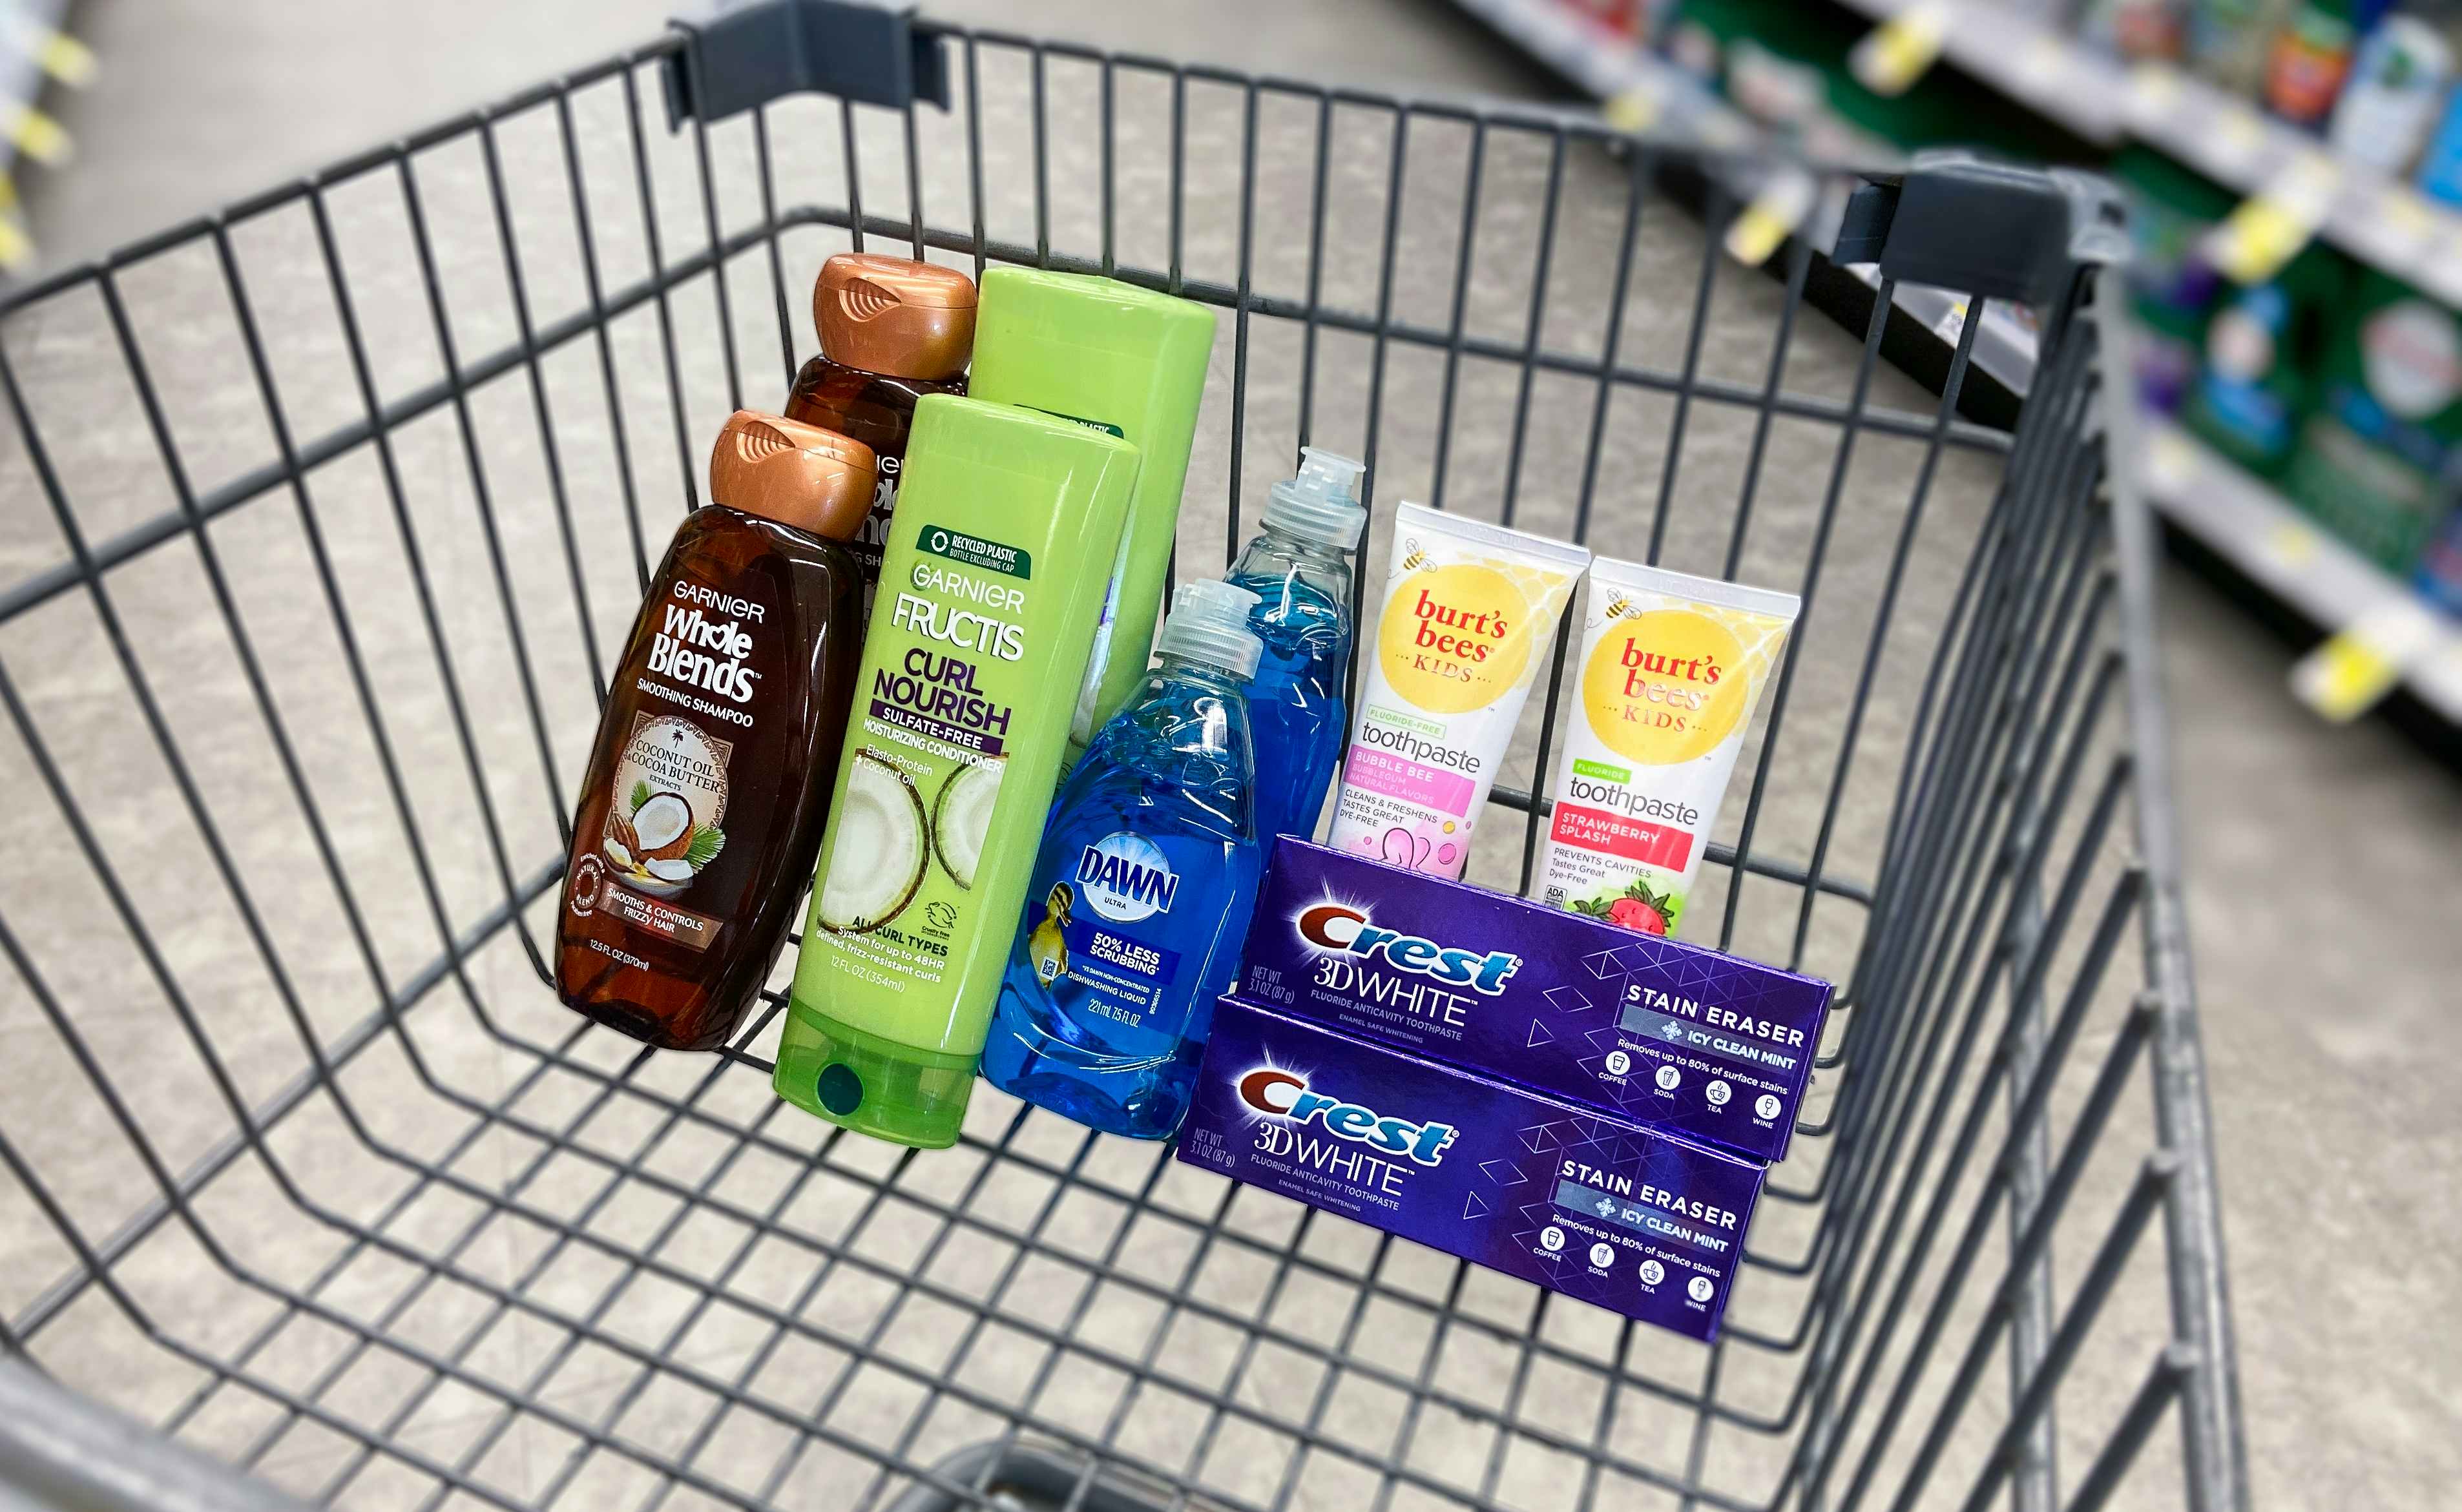 walgreens cart with garnier whole blends and fructis shampoo and conditioner, dawn dish soap, burts bees toothpaste, crest toothpaste